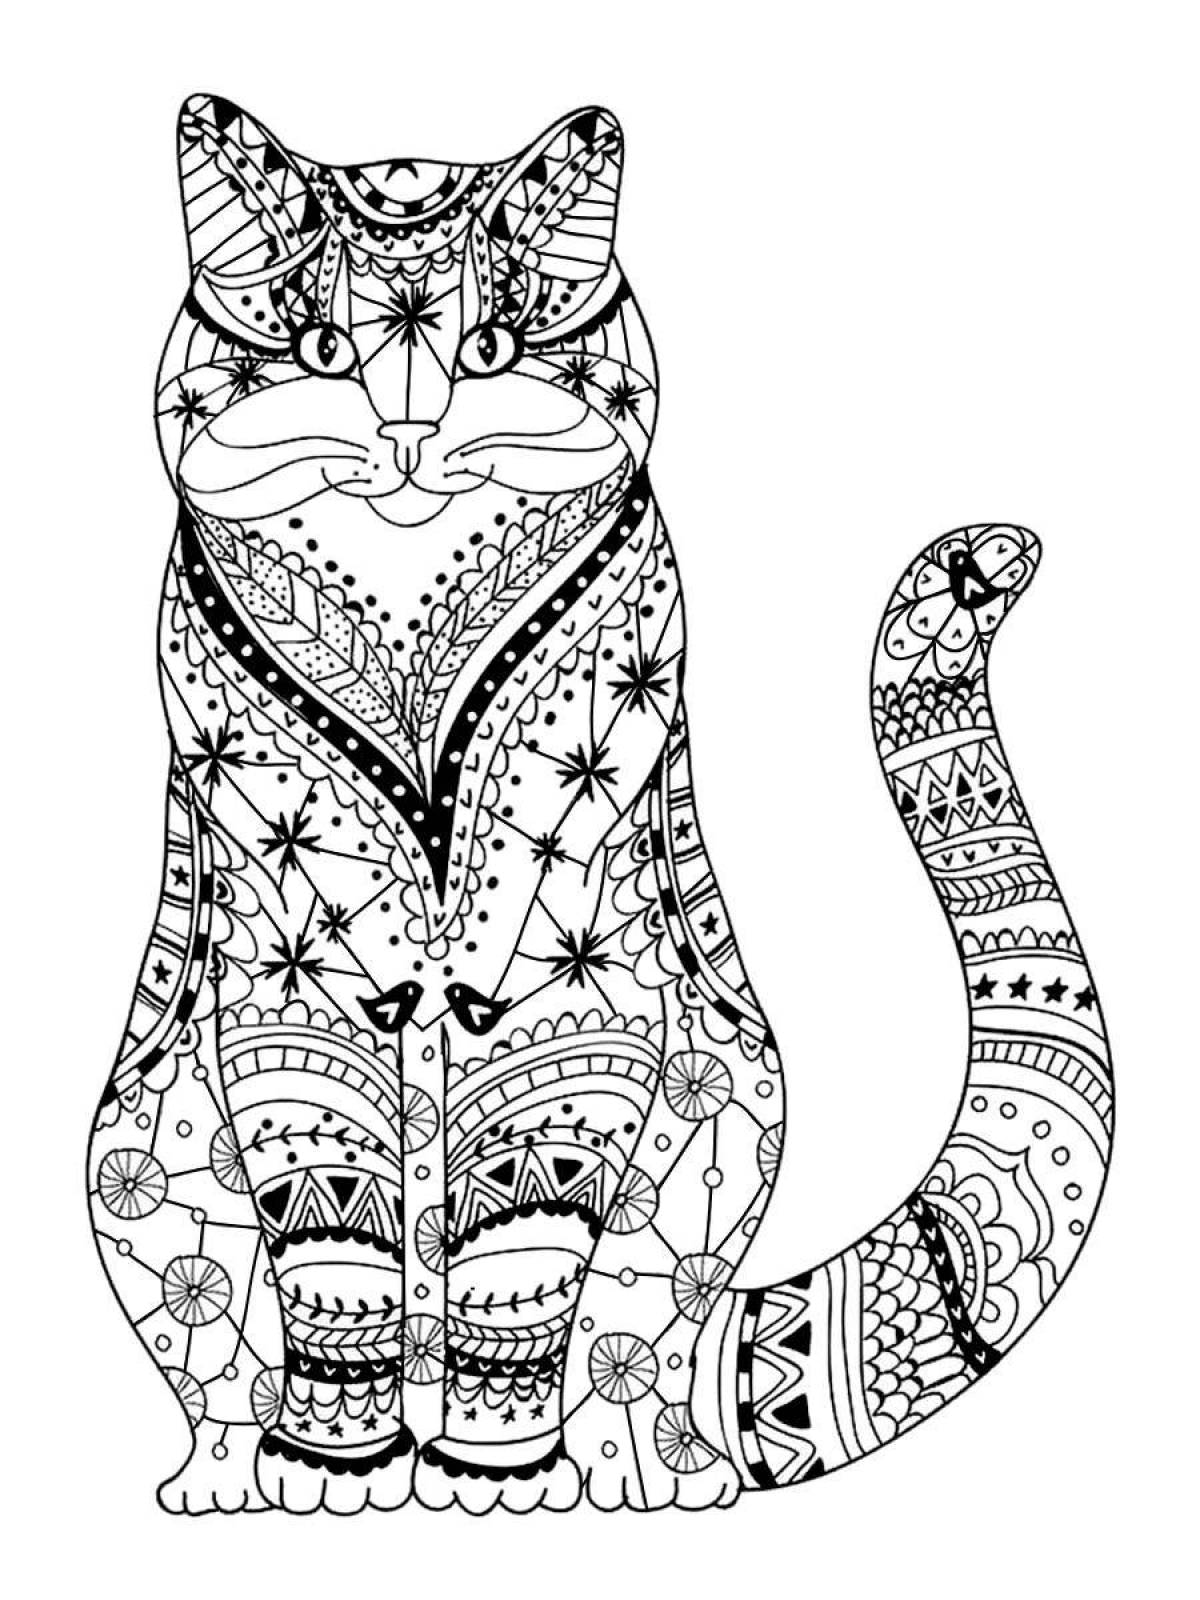 Coloring page funny patterned cat